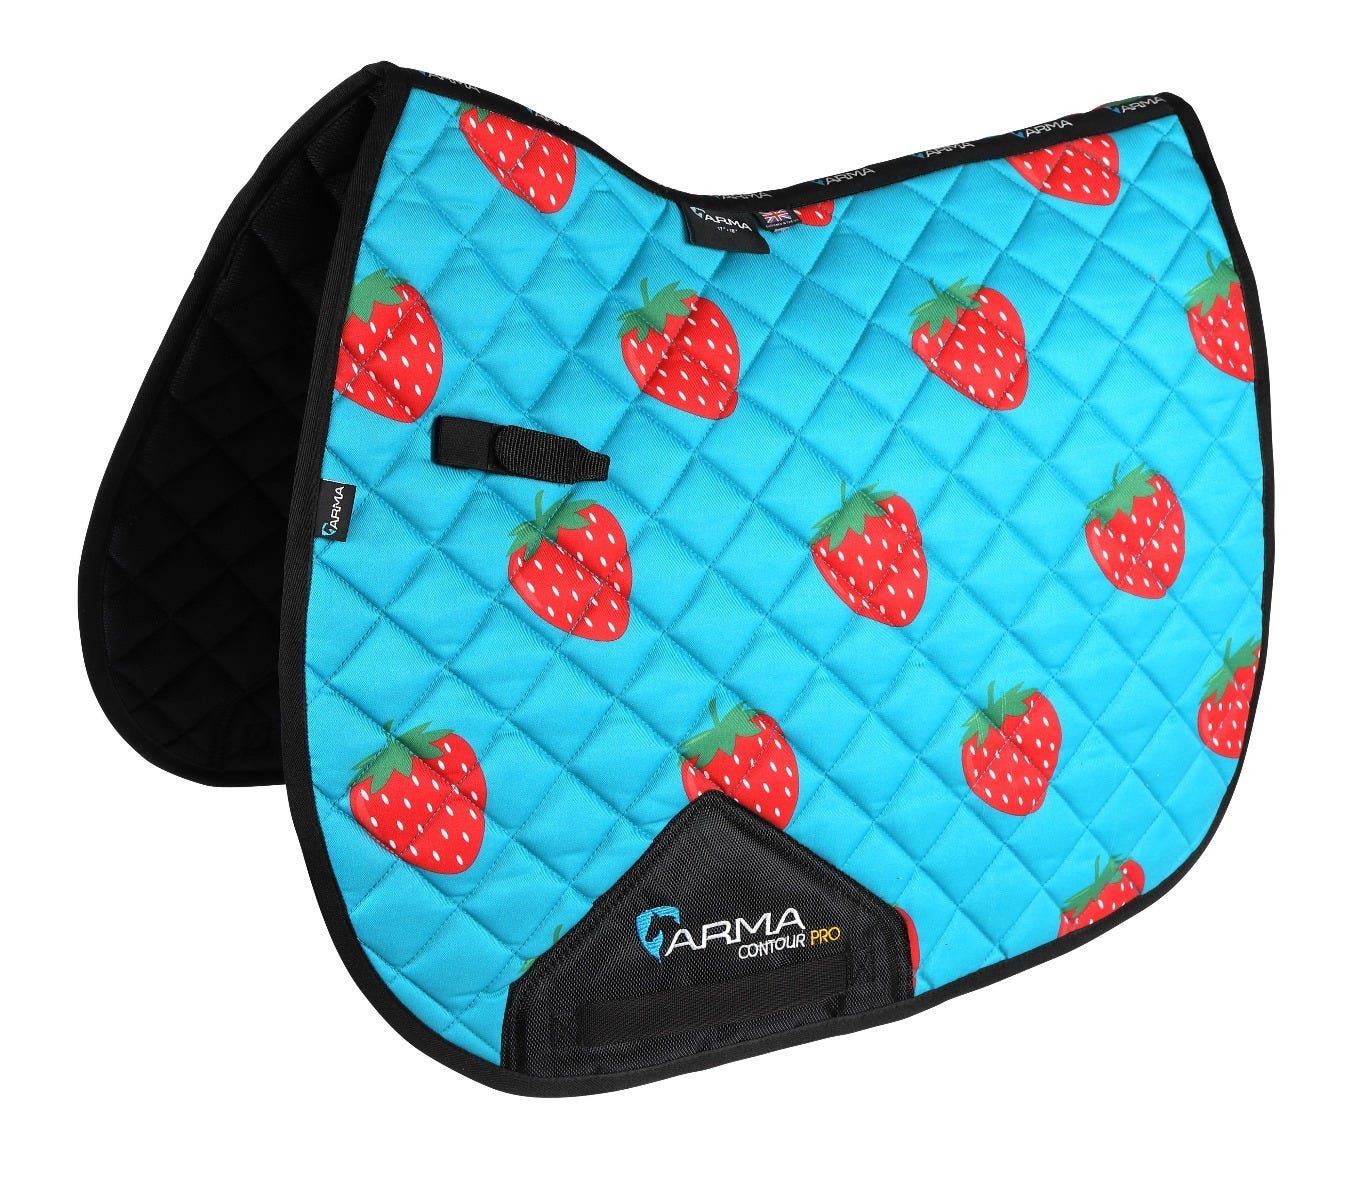 Shires ARMA Fruity Saddlecloth - Just Horse Riders